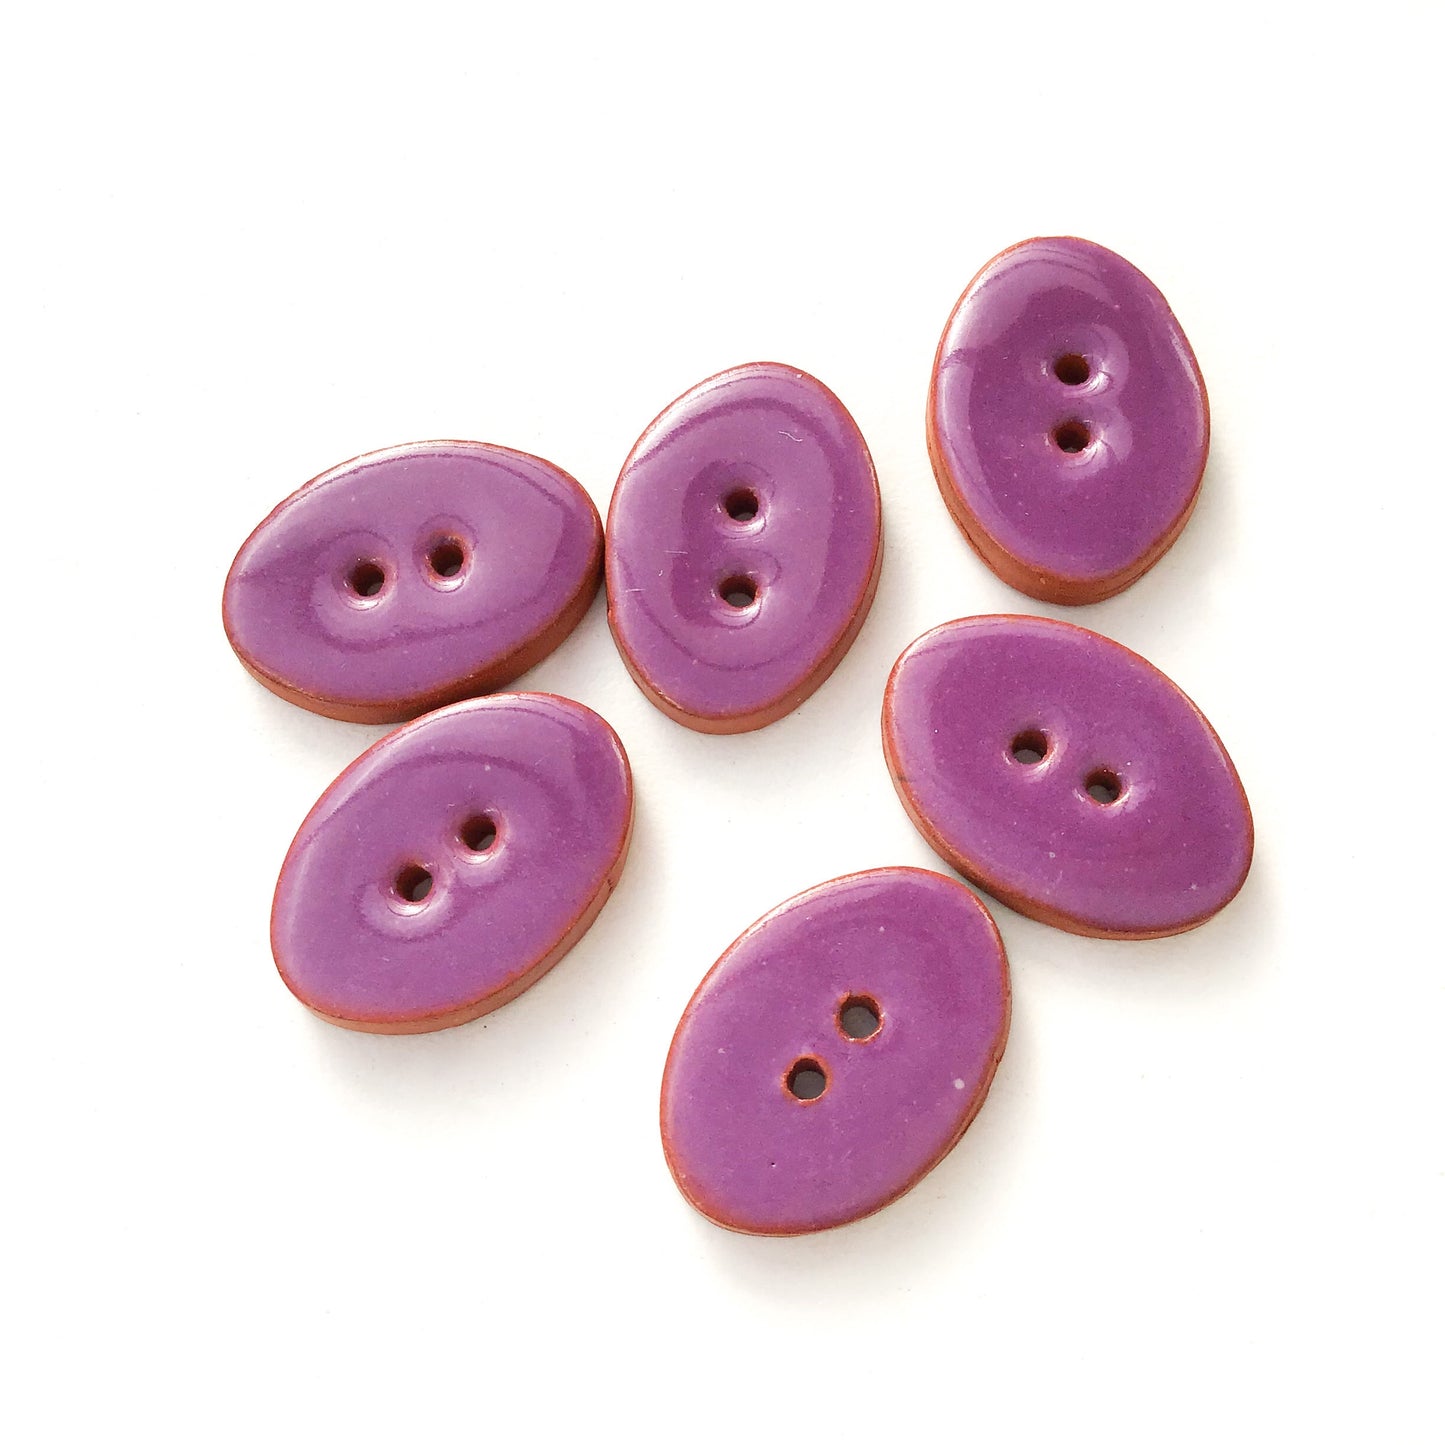 Grape Purple Oval Clay Buttons - 5/8" x 7/8" - 6 Pack (ws-92)